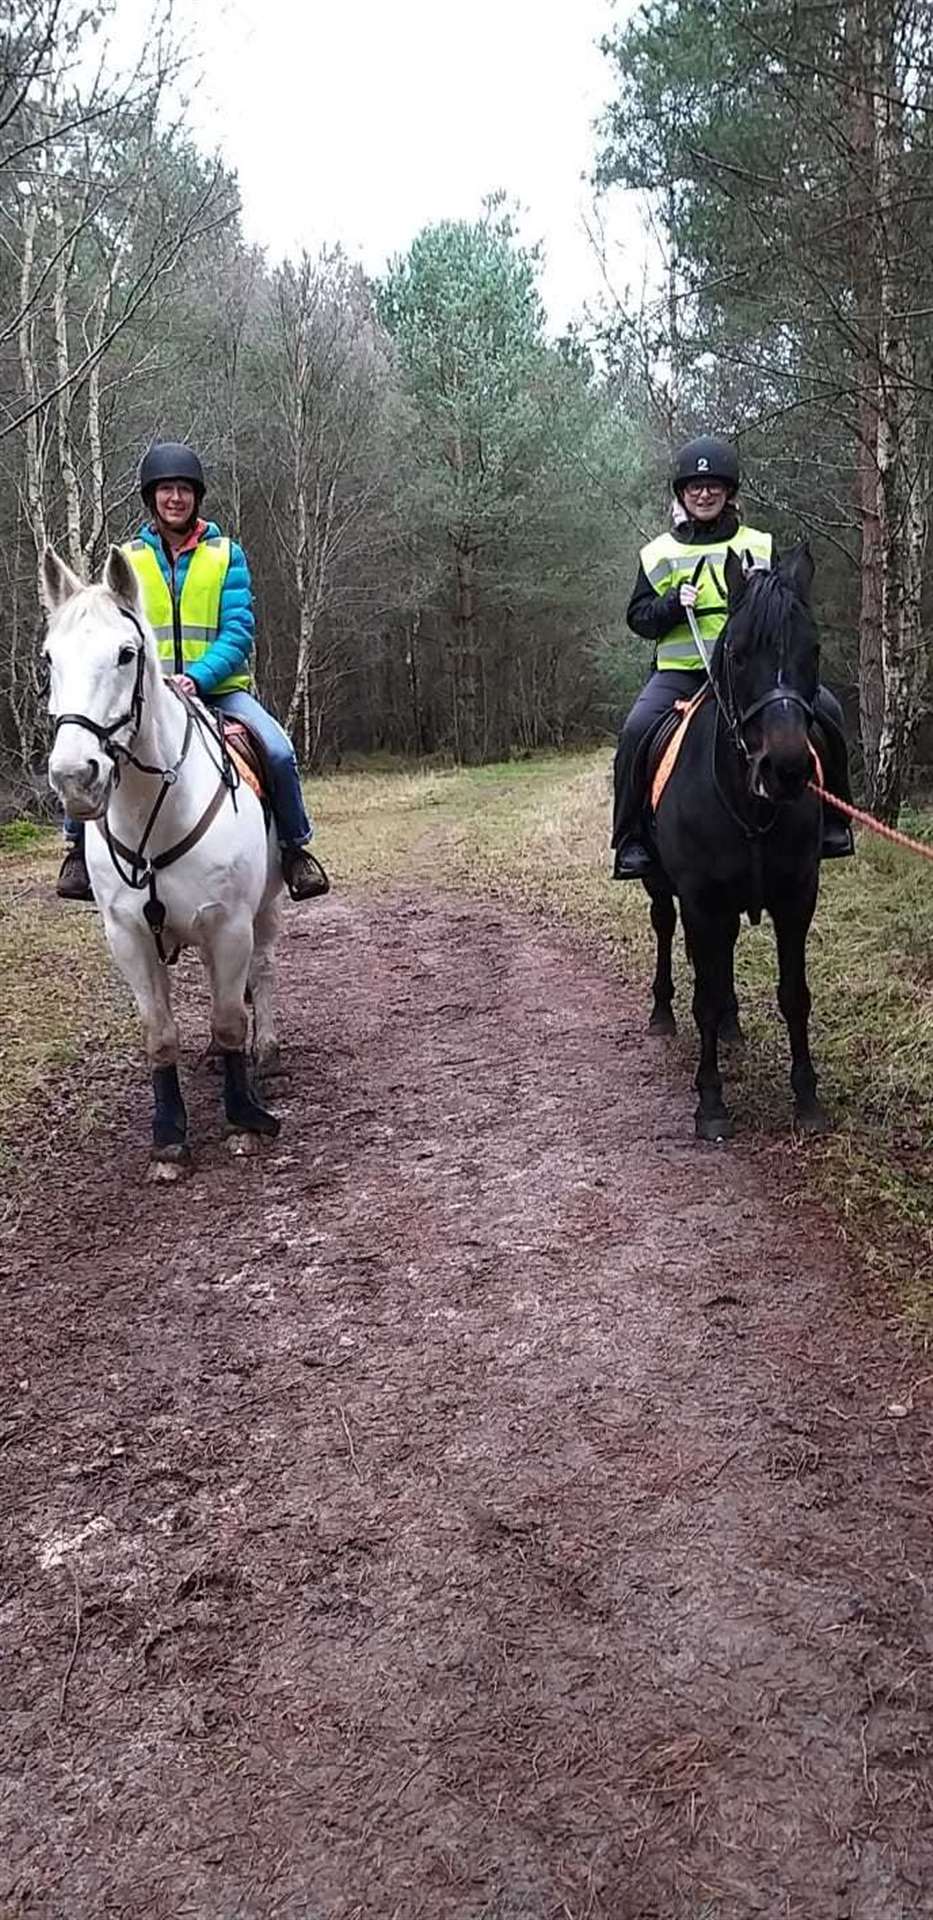 Tracey Cormack out horse riding with 'Aaliyah'.